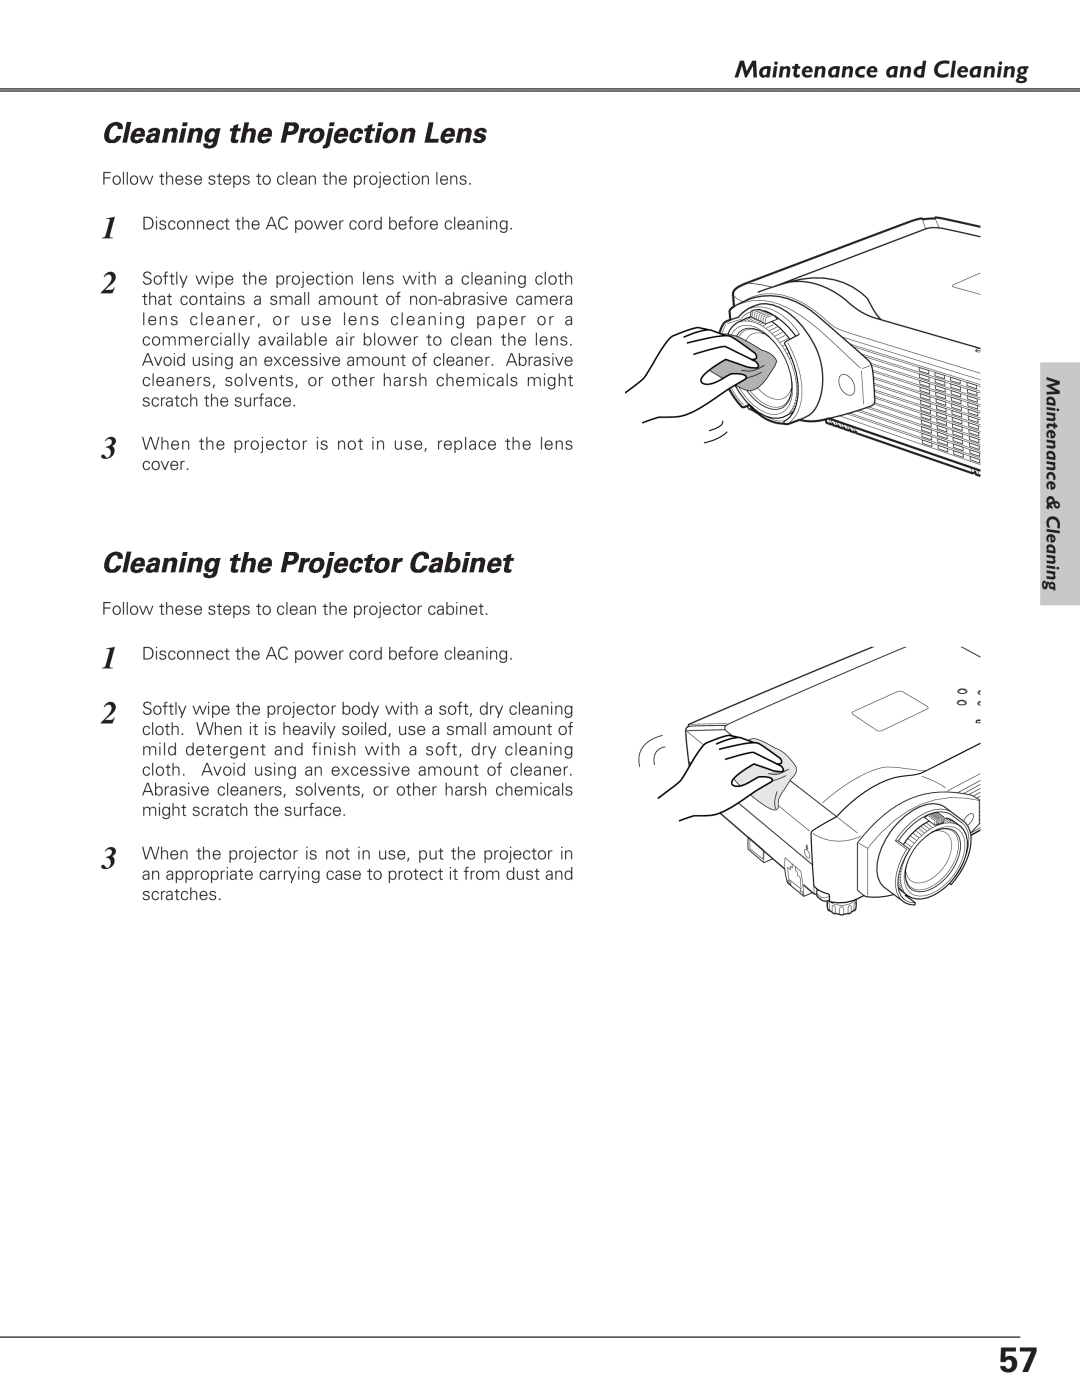 Eiki LC-XB27 owner manual Cleaning the Projection Lens, Cleaning the Projector Cabinet, Maintenance and Cleaning 